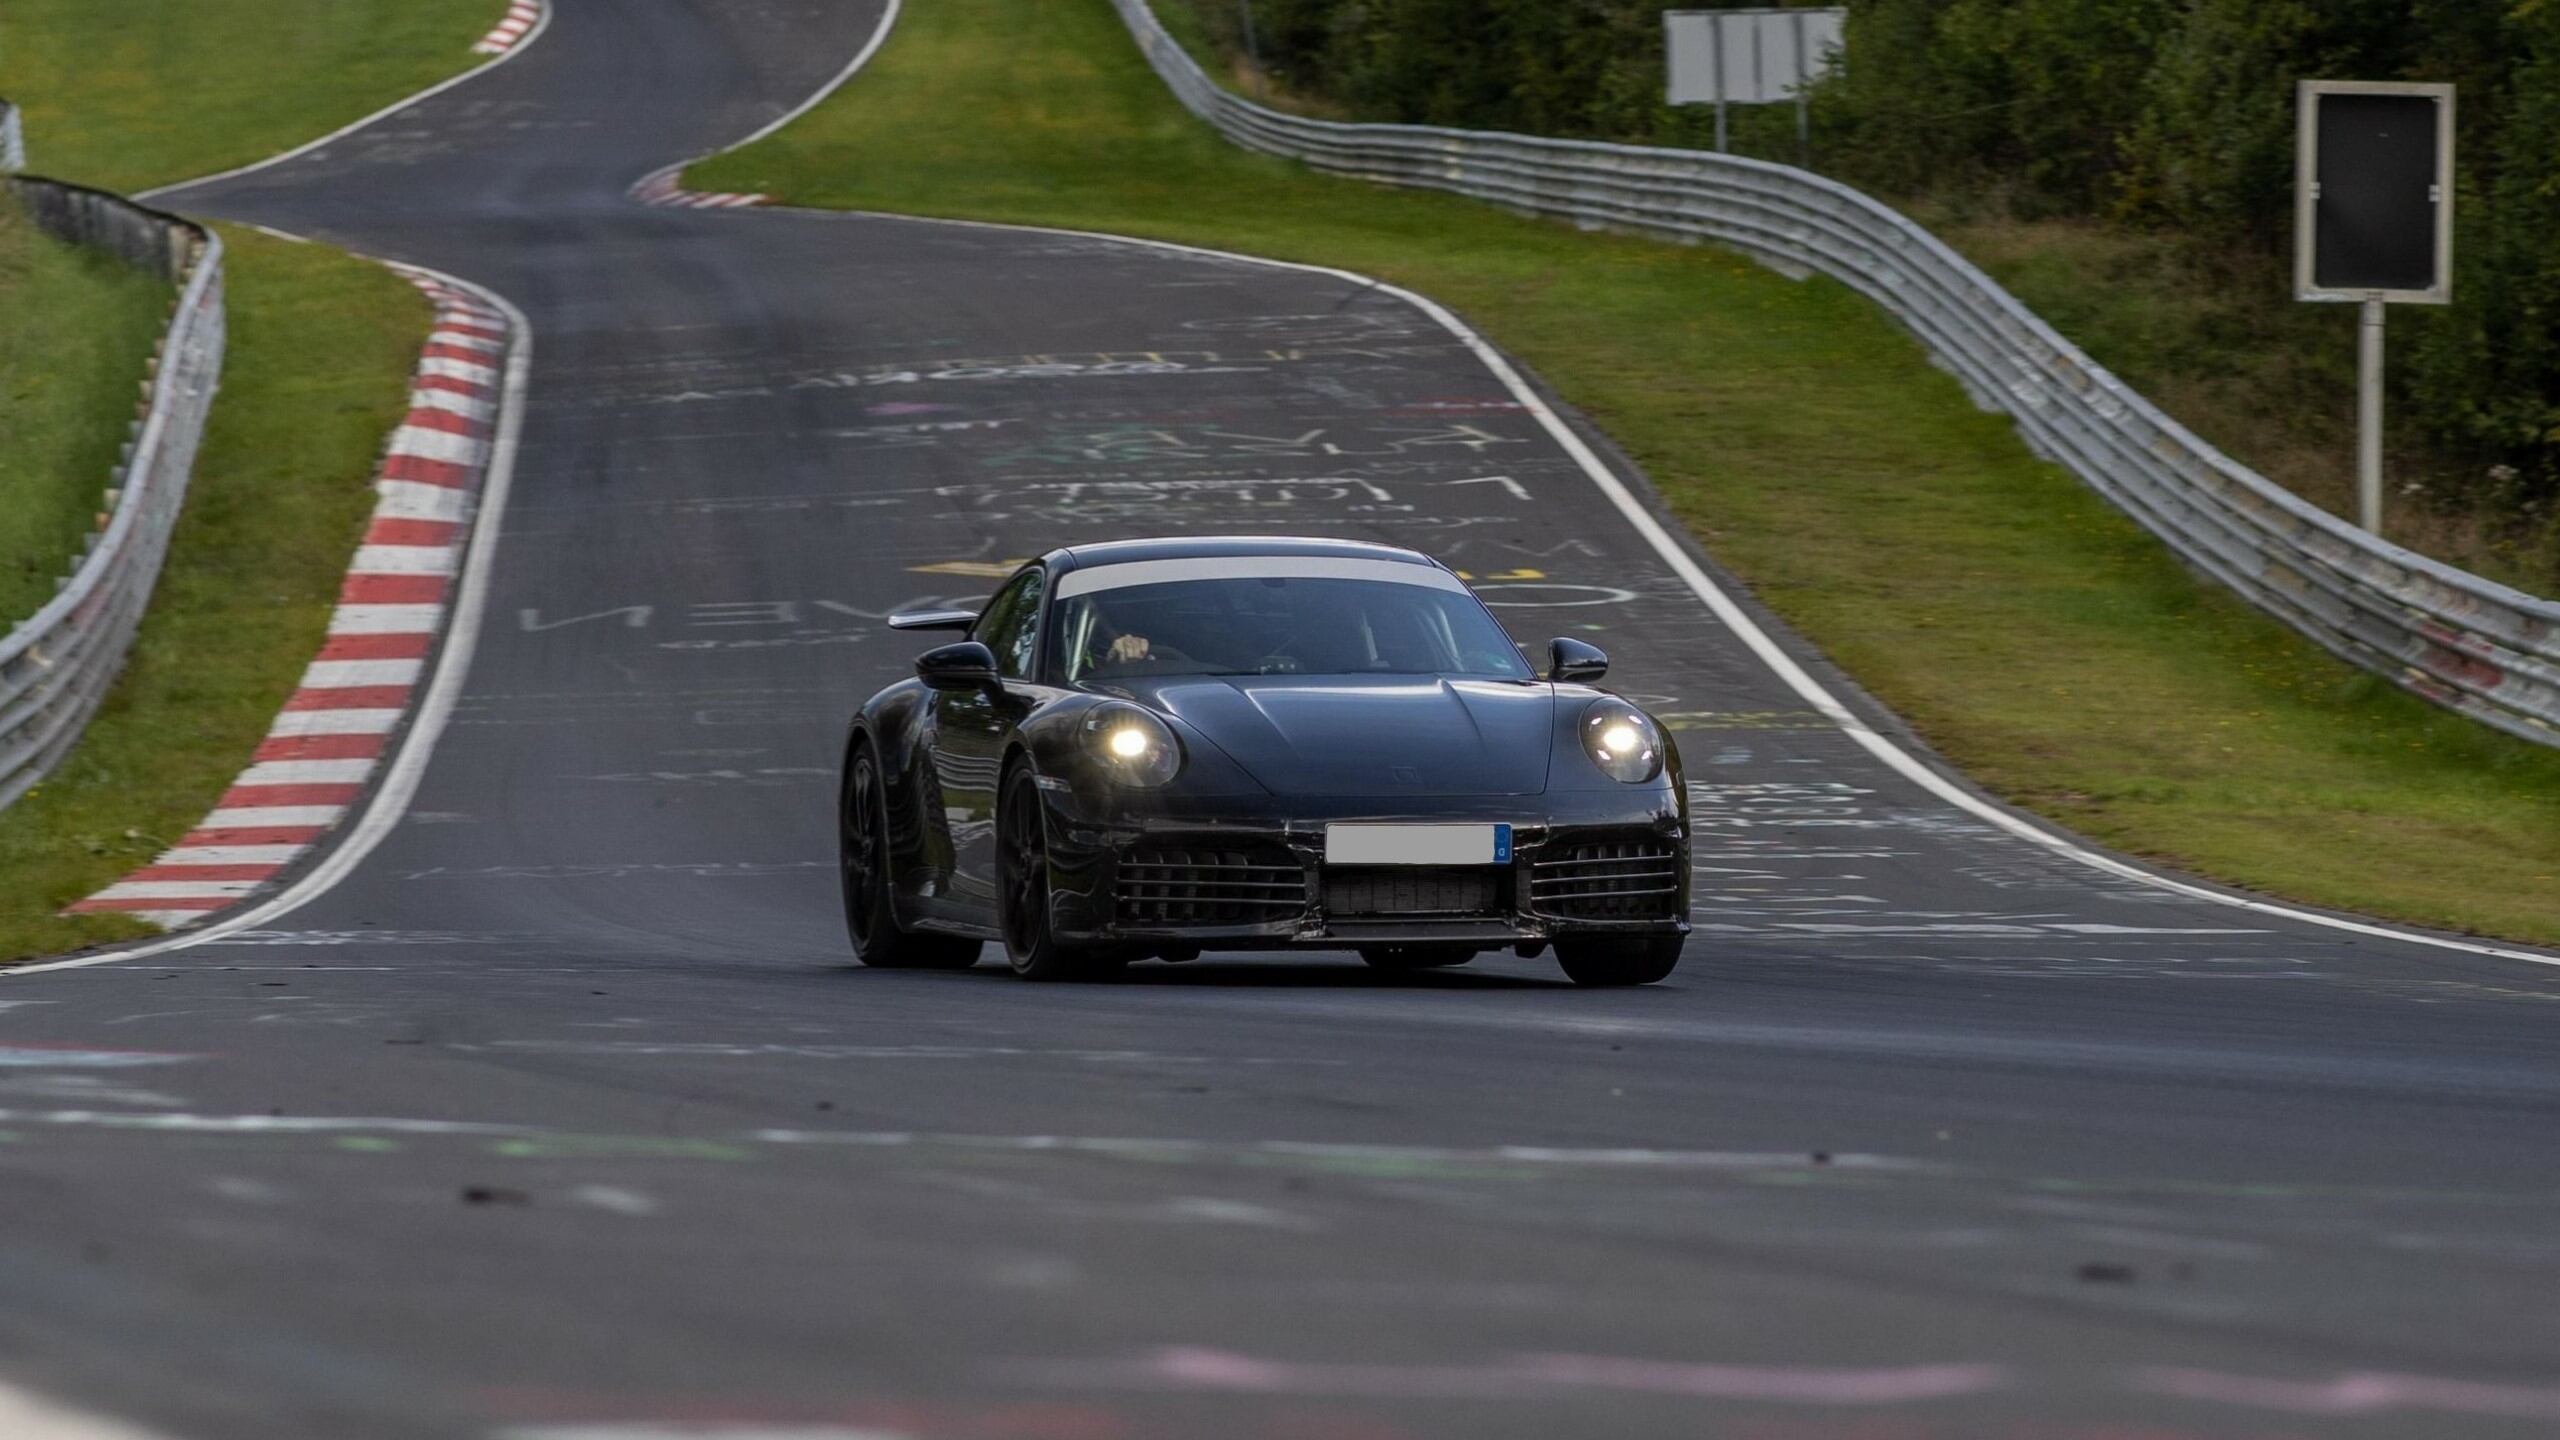 The New Porsche 911 Hybrid Being Tested At The Nürburgring Nordschleife Race Track